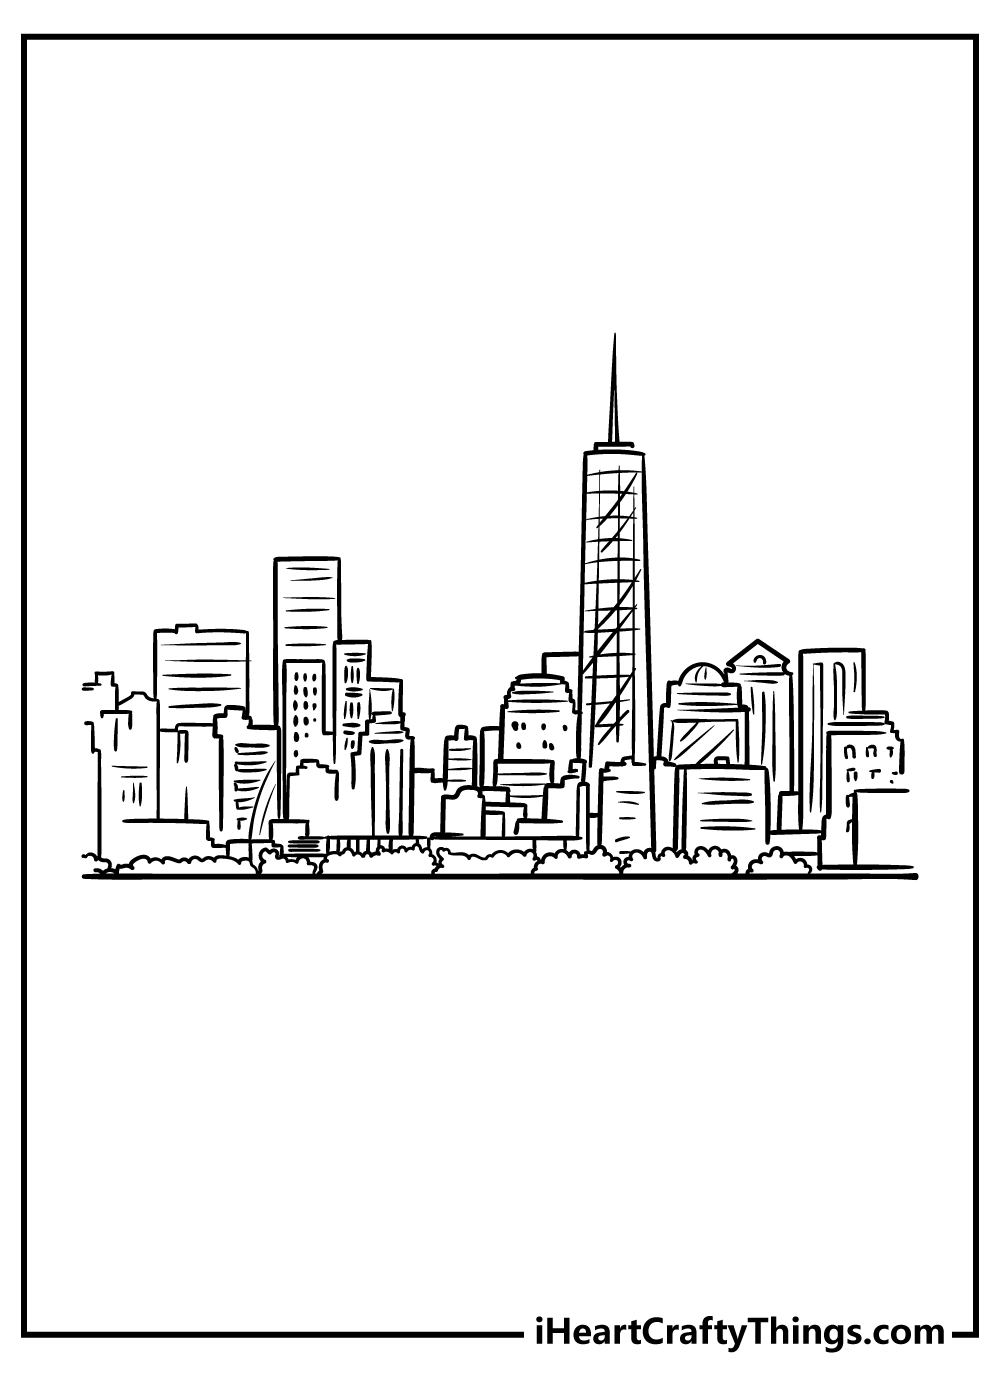 Metropolis Coloring Pages for kids free download